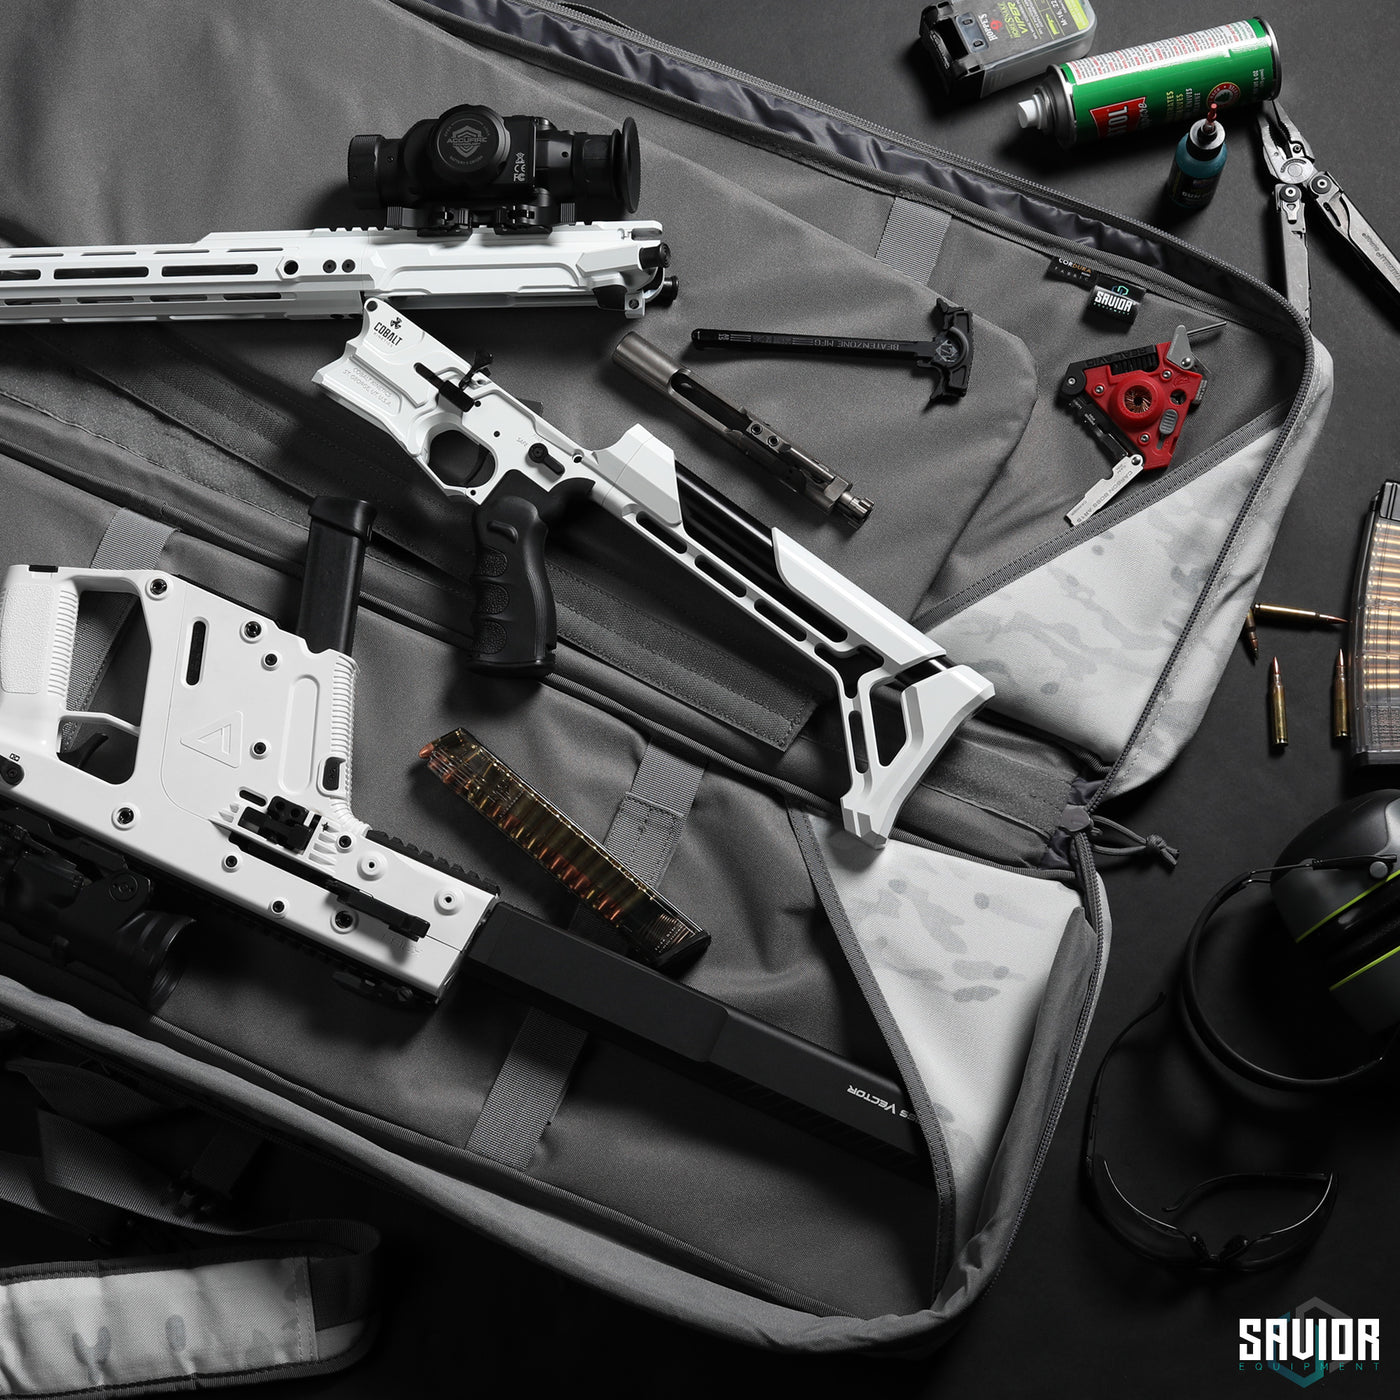 Removable Divider - Separate Your Firearms Into Its Own Personal Compartment or Use it as an Additional Mat when Removed. Upgraded design allows bag to lay completely flat. Firearms shown not included.